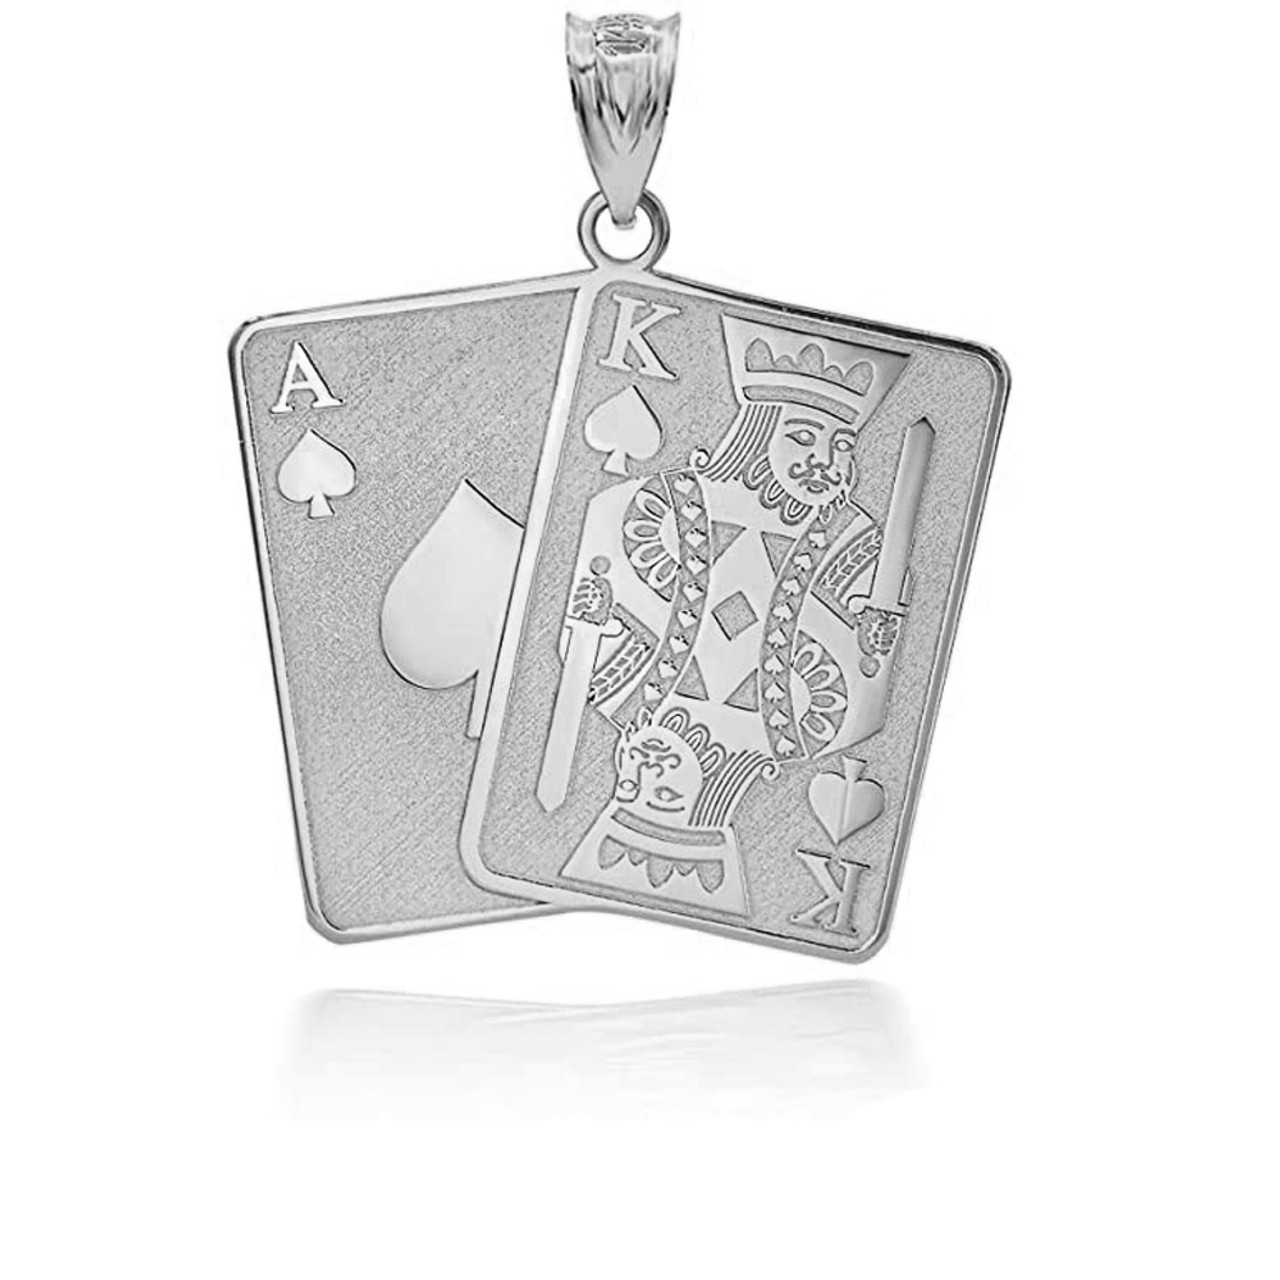 Personalised Engraved Necklace Poker Playing Cards Deck King 